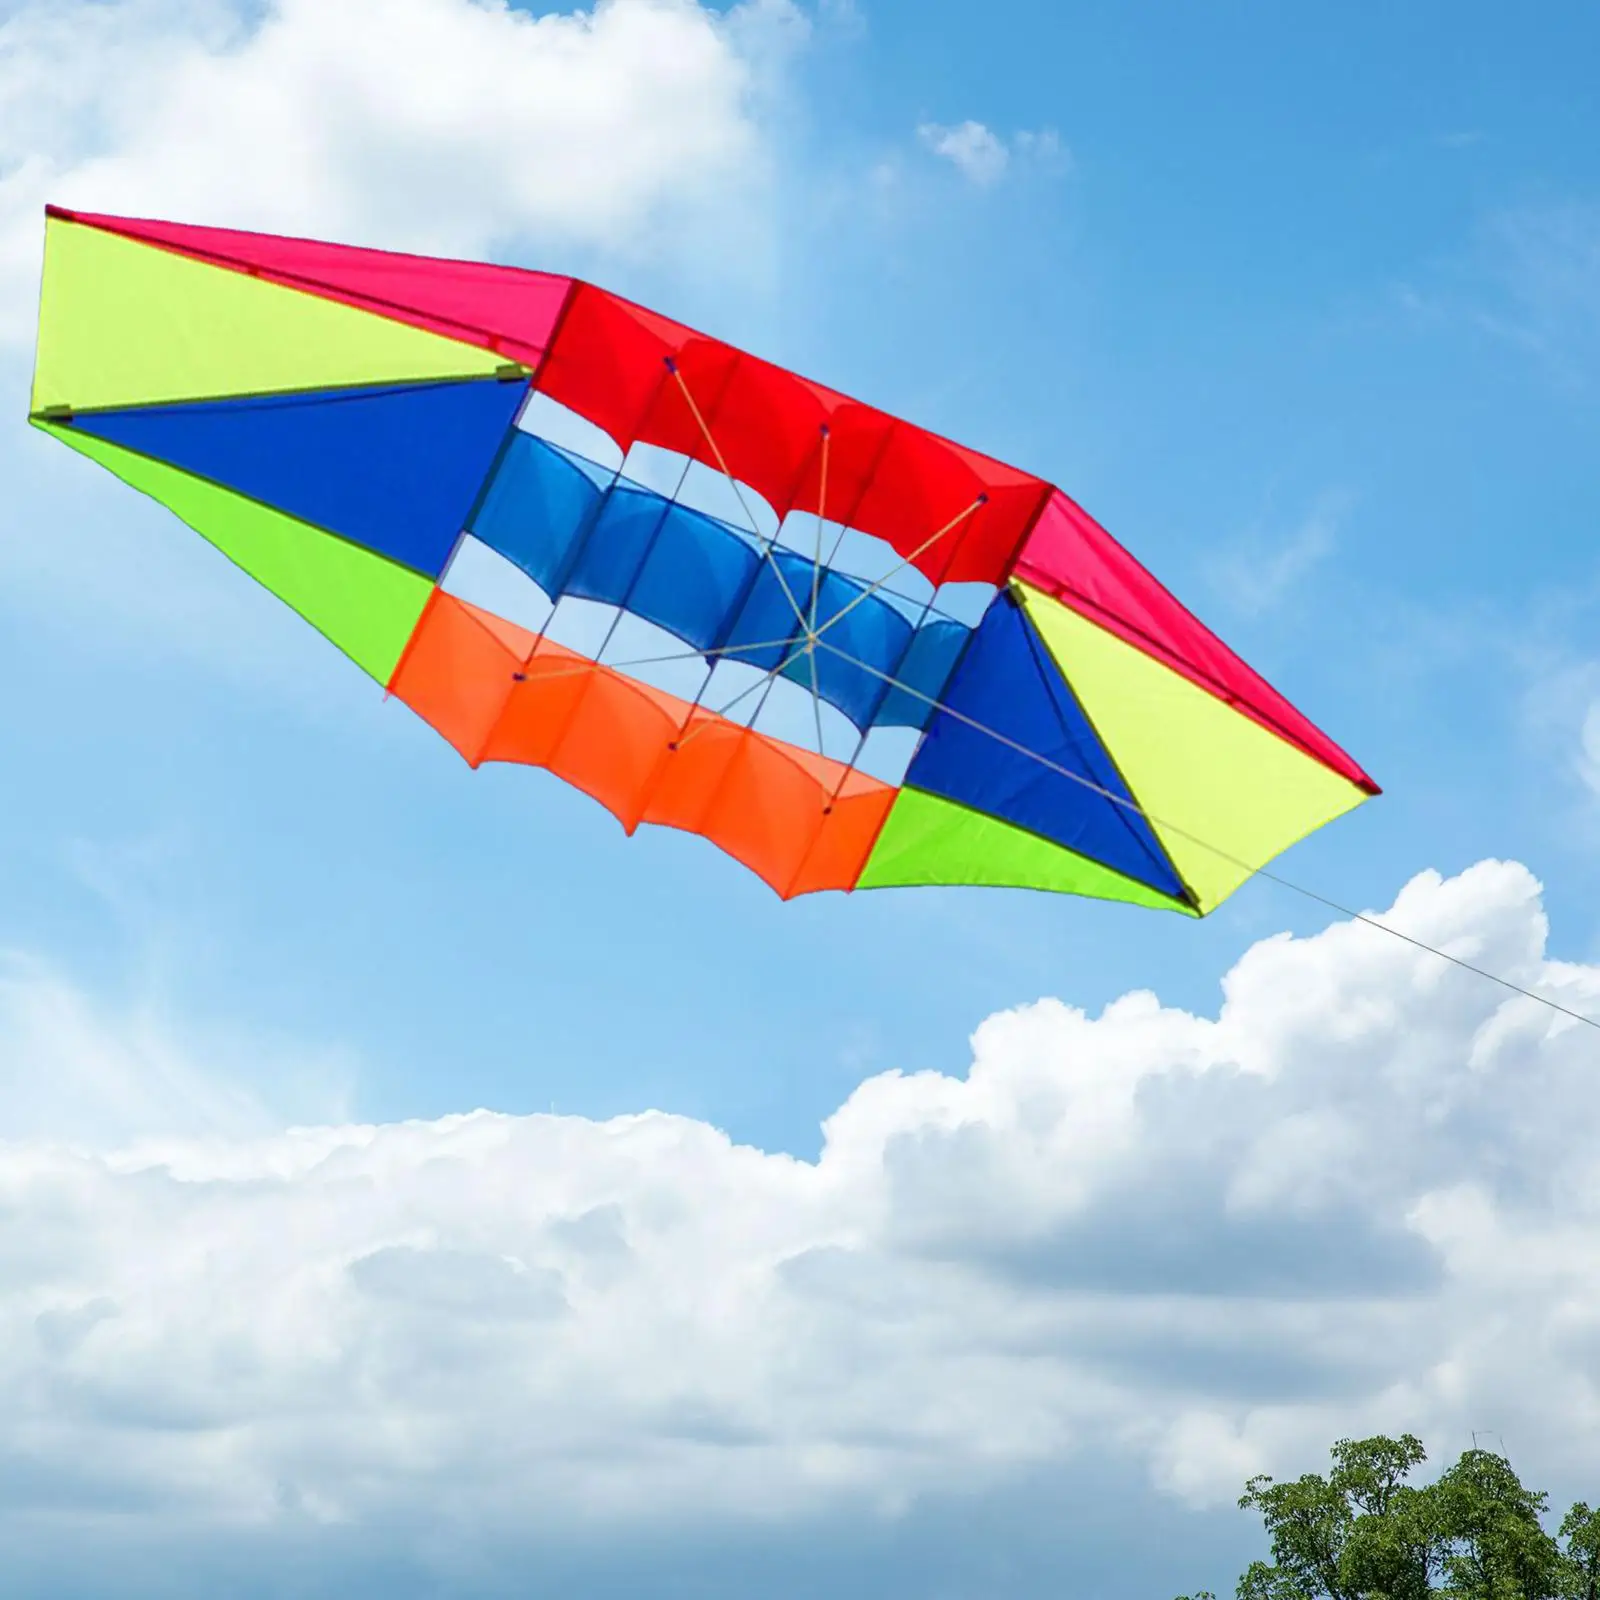 250Cmx80cm Colorful  Toy Outdoor Games Activities Easy to Fly Parachute Single Line s  for Children Girls Boys